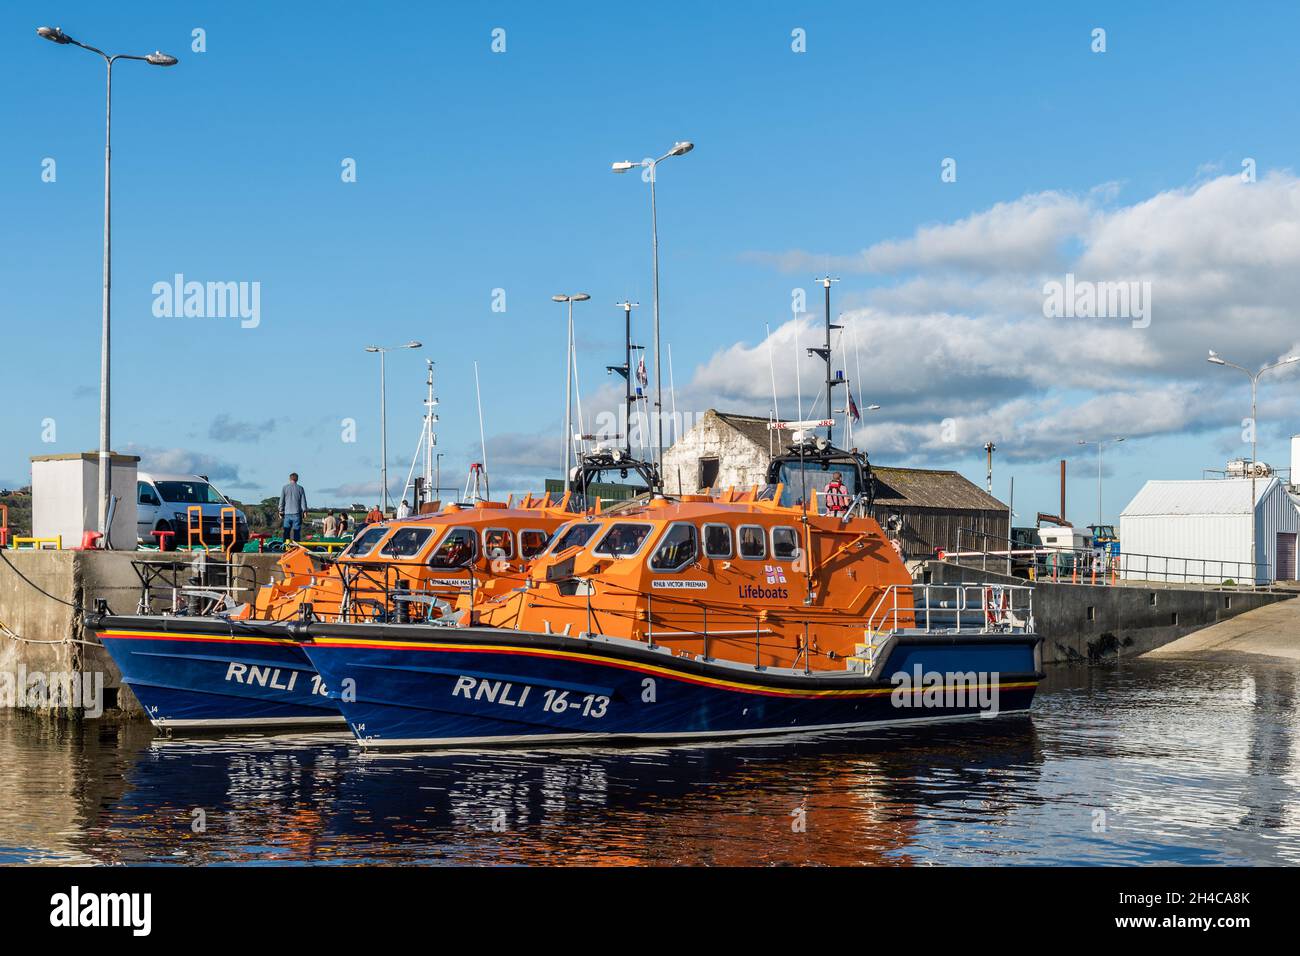 Two RNLI lifeboats moored in Baltimore, West Cork, Ireland. Stock Photo